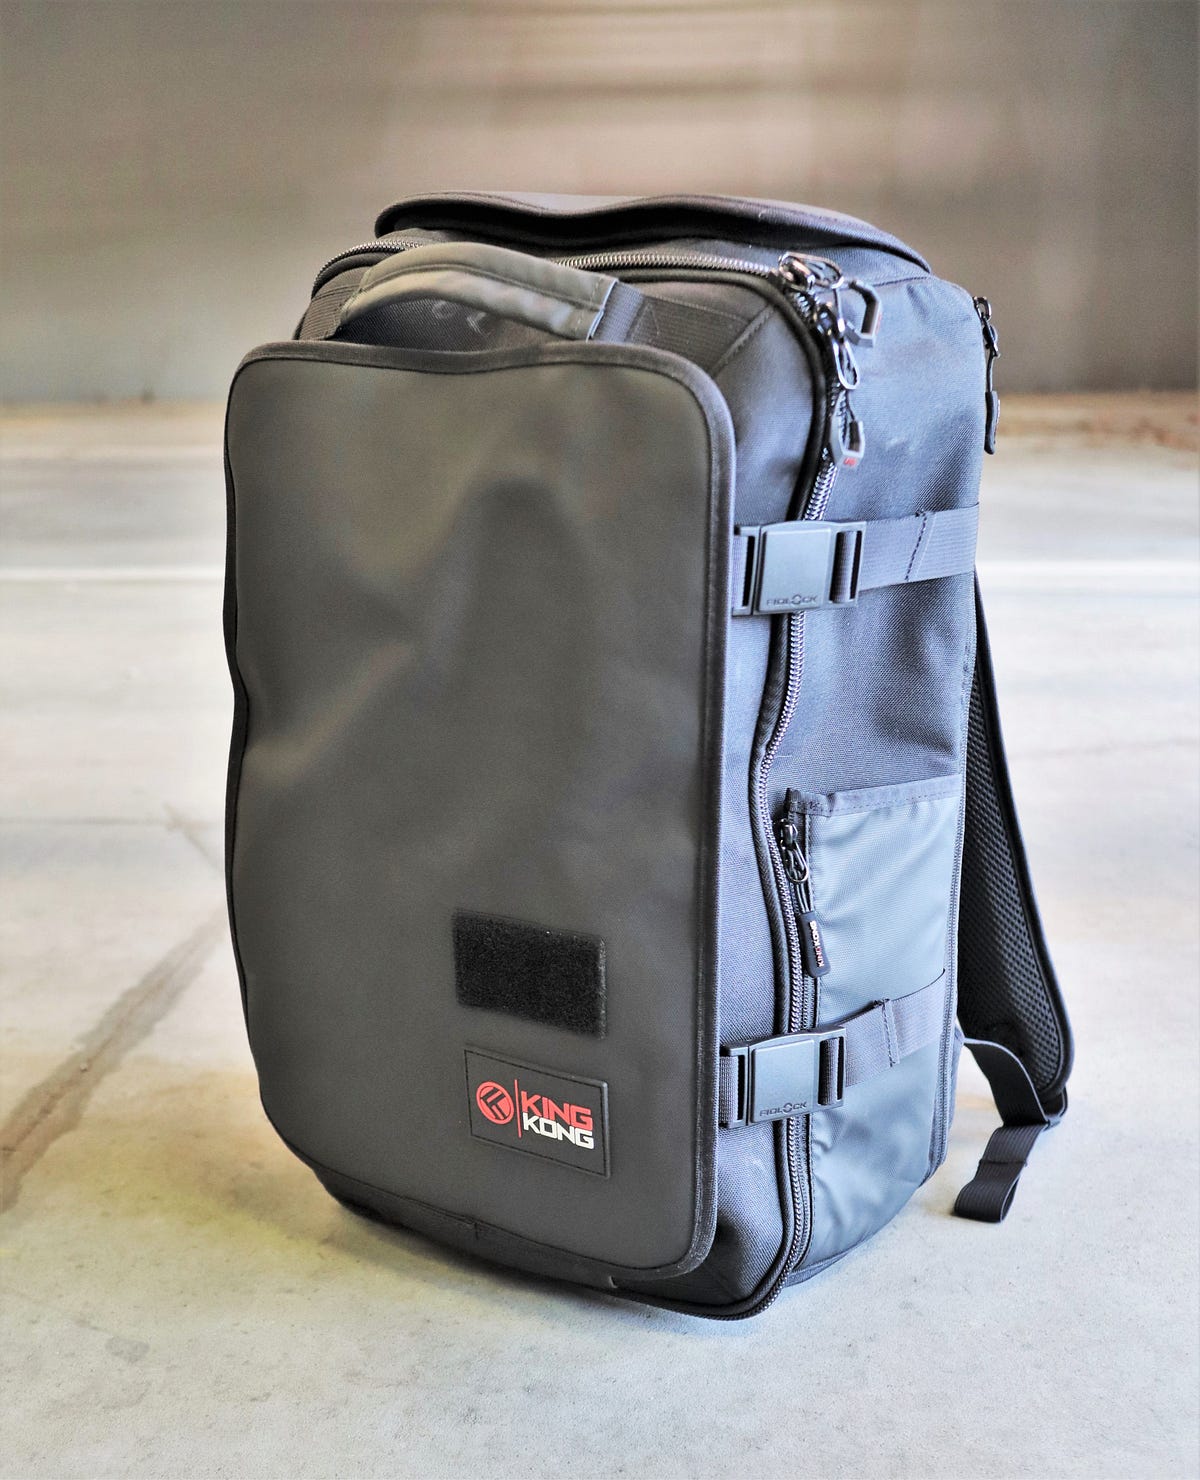 King Kong Edge35 Backpack Review. Over the past few years we’ve tested ...